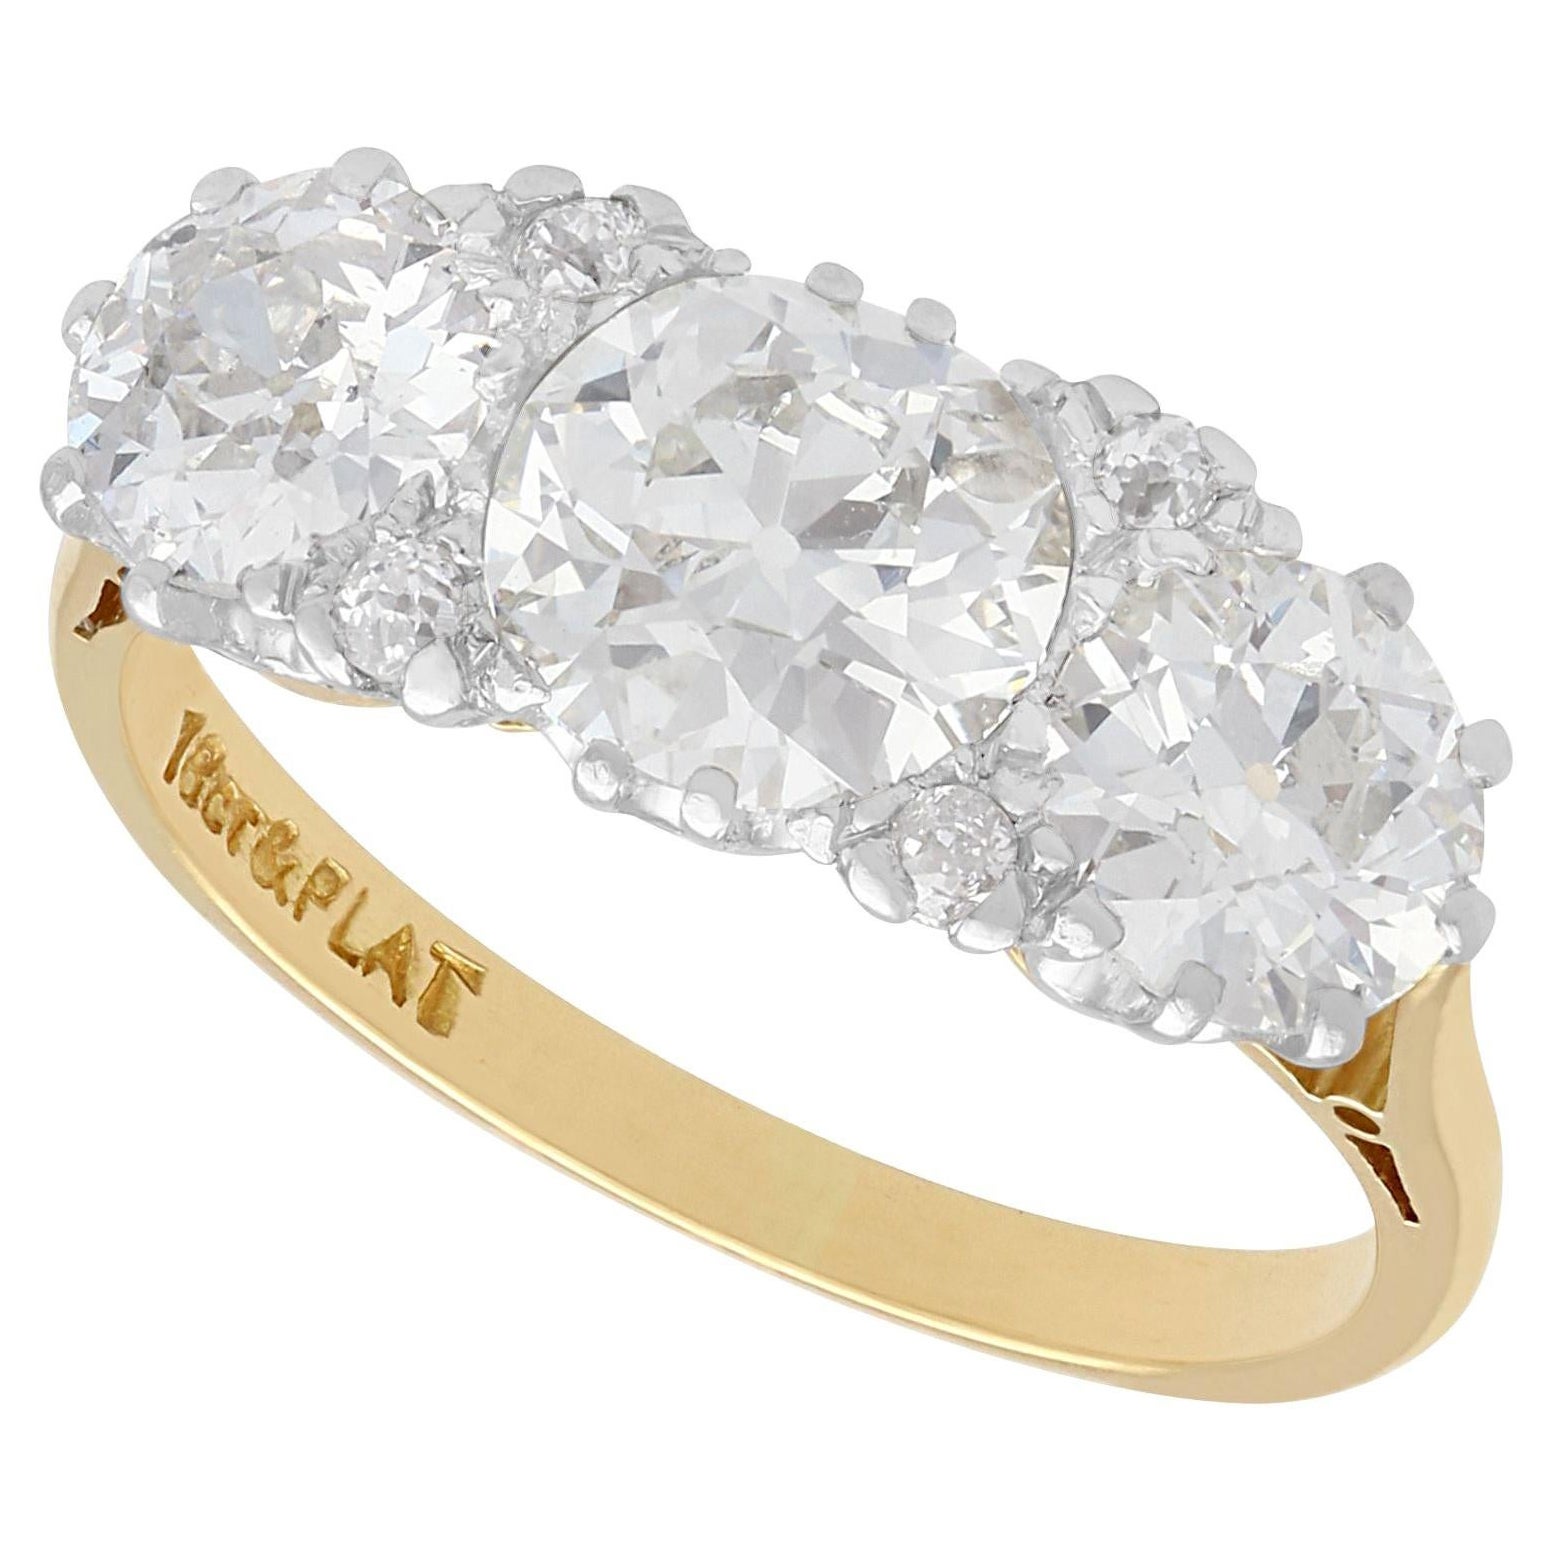 1940s 2.76ct Diamond and 18ct Yellow Gold Trilogy Ring For Sale